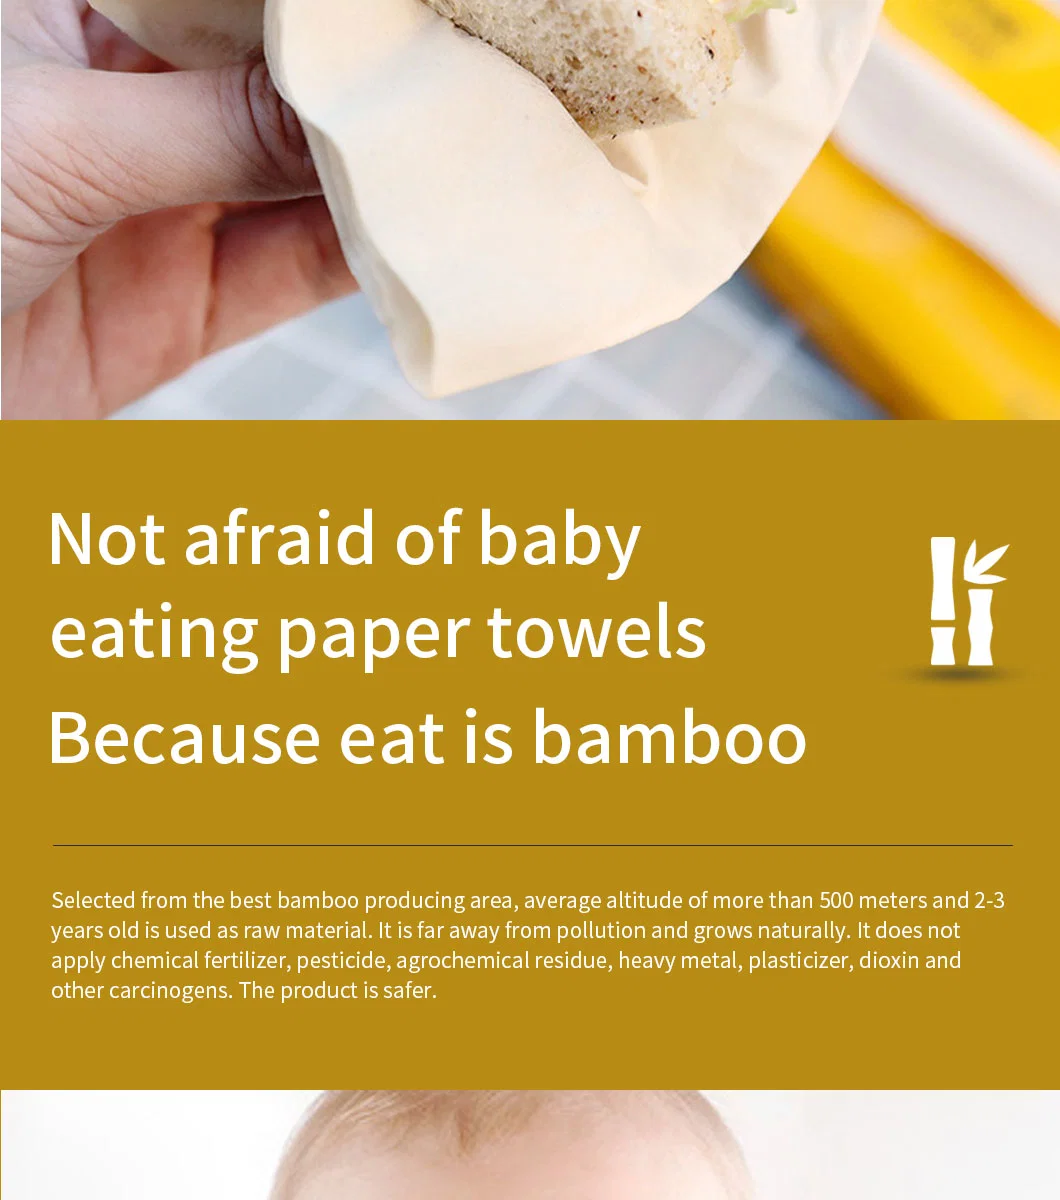 Baby Care Bamboo Facial Paper/Towel, Super Safe Biodegradable Bath Tissue/Towel, Eco Friendly Ultra Soft 1 Ply Sheets, 120 Counts Special Formula OEM Welcome